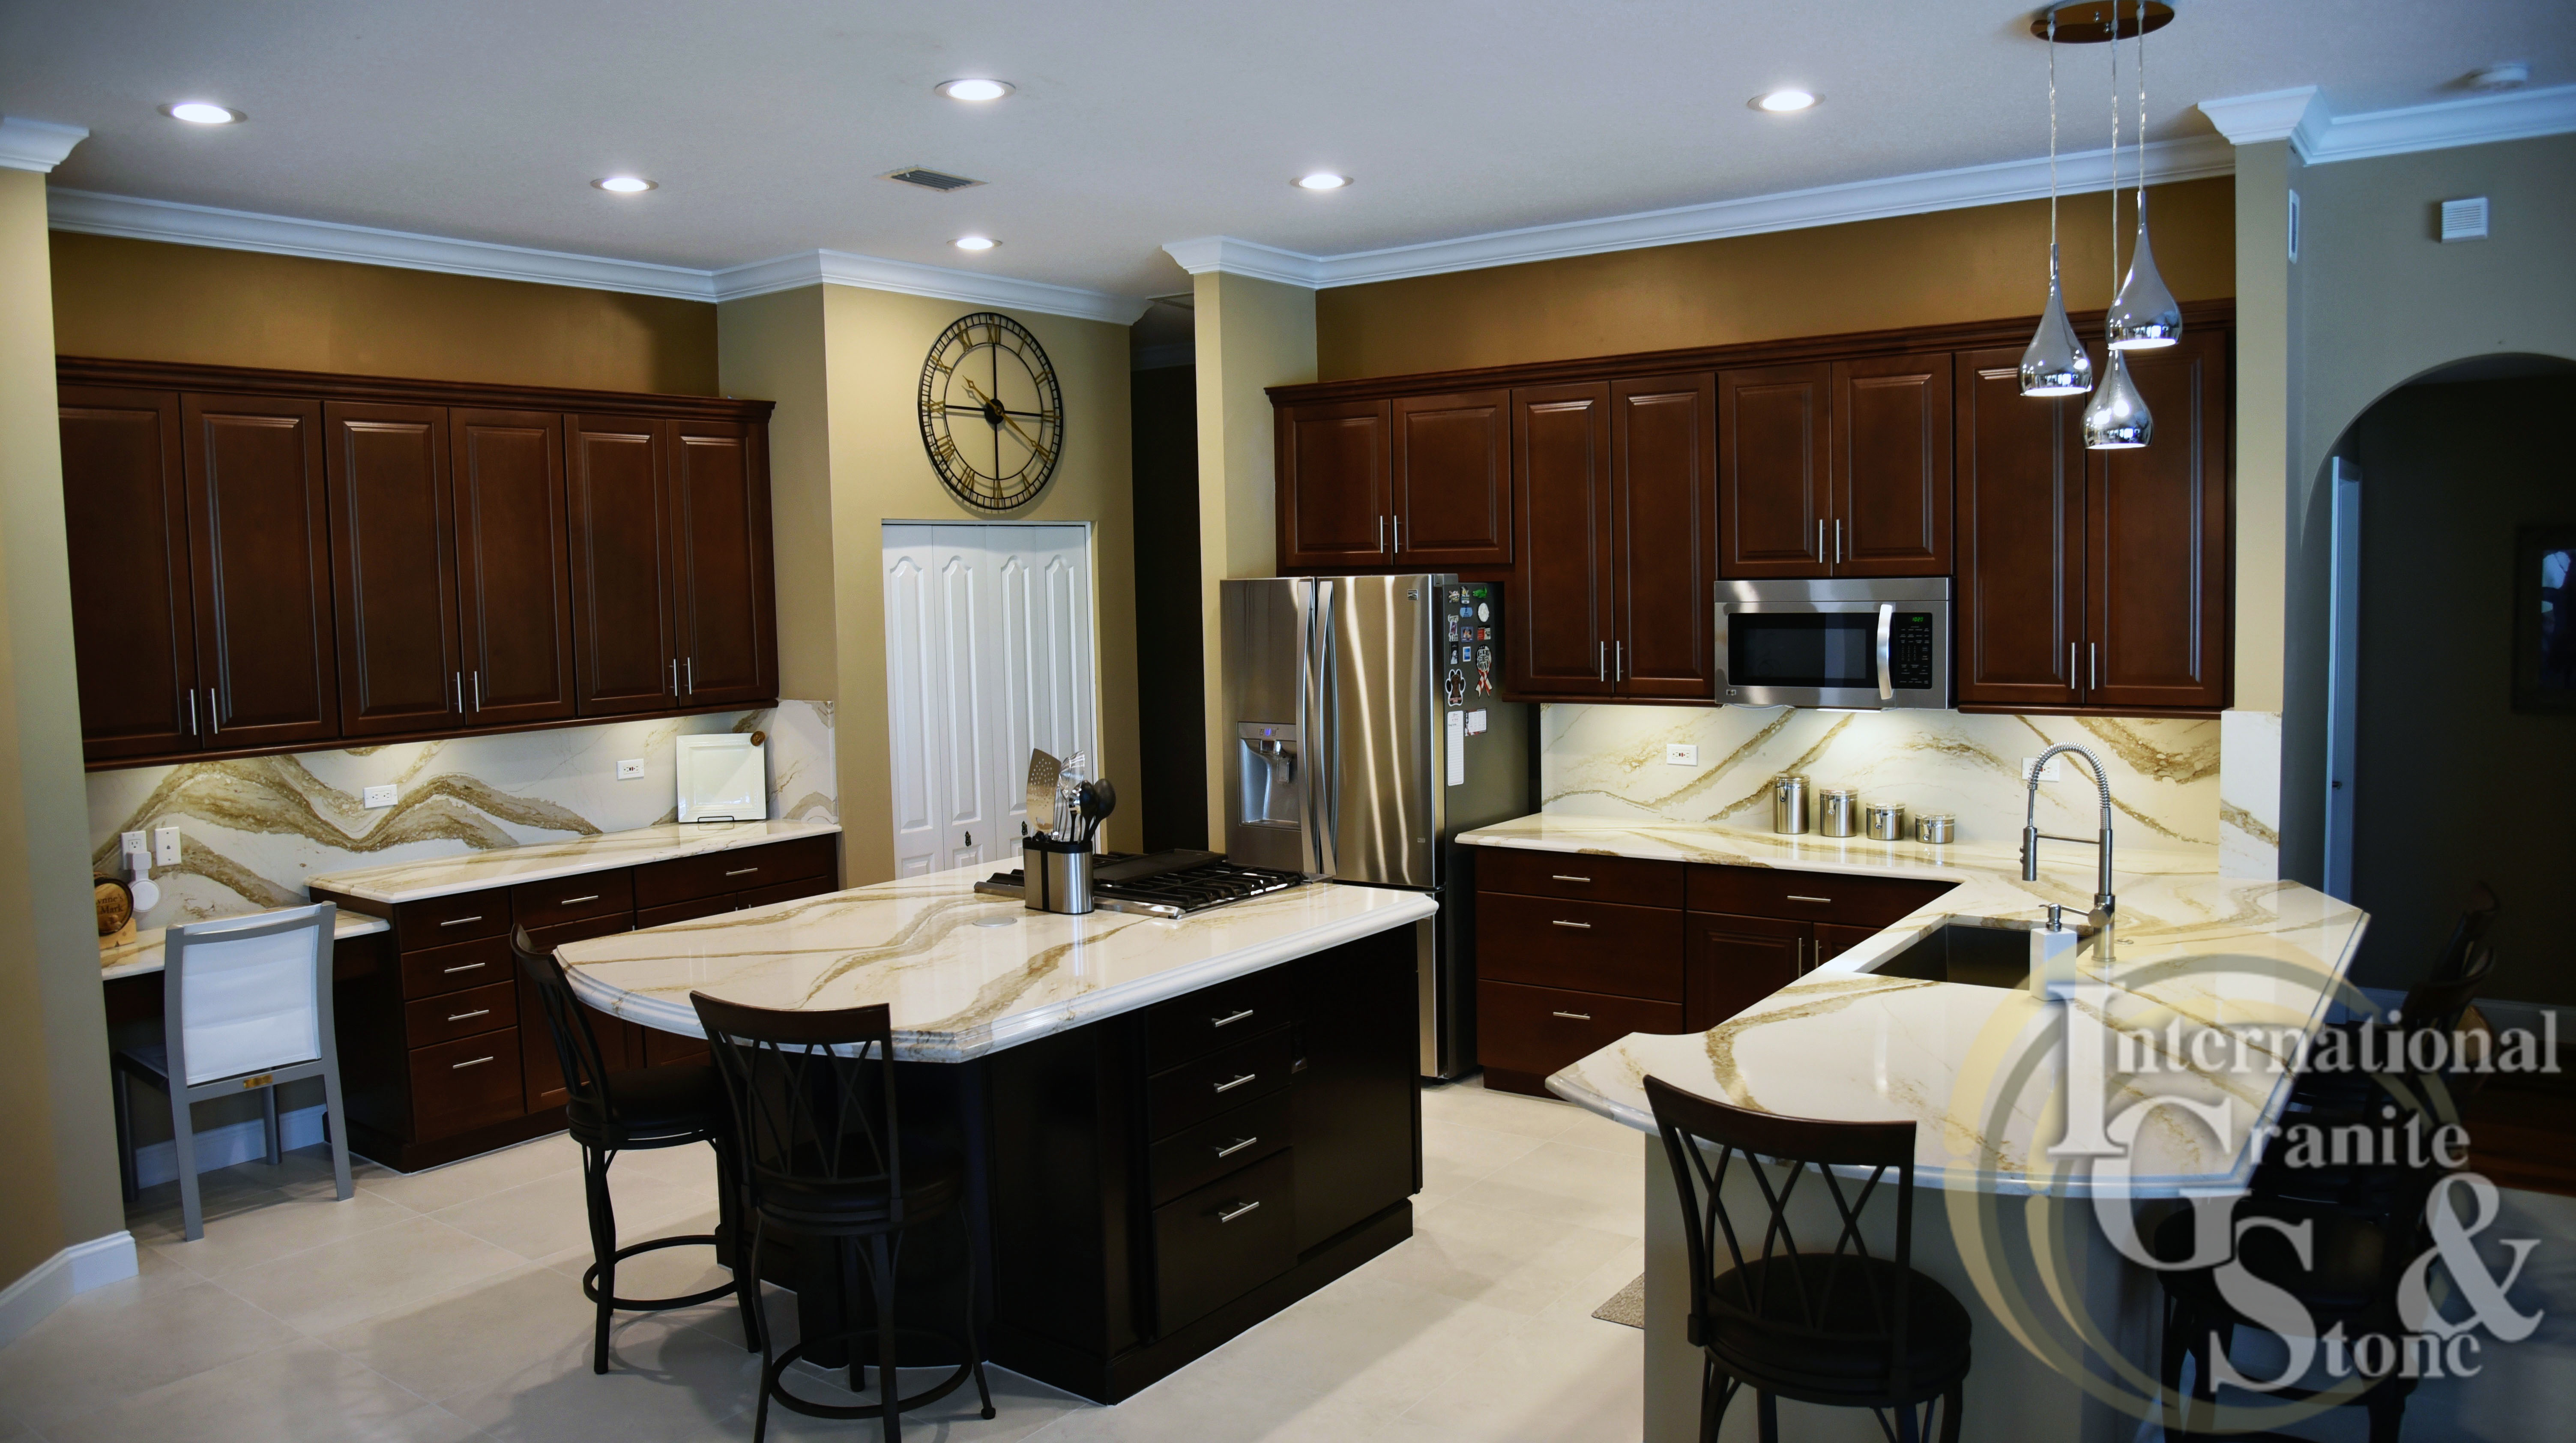 Light Cambria Quartz Countertops with Dark Cabinets Brittanicca Gold Black Cabinets Brown Cabinets Stainless Steel Appliacnes